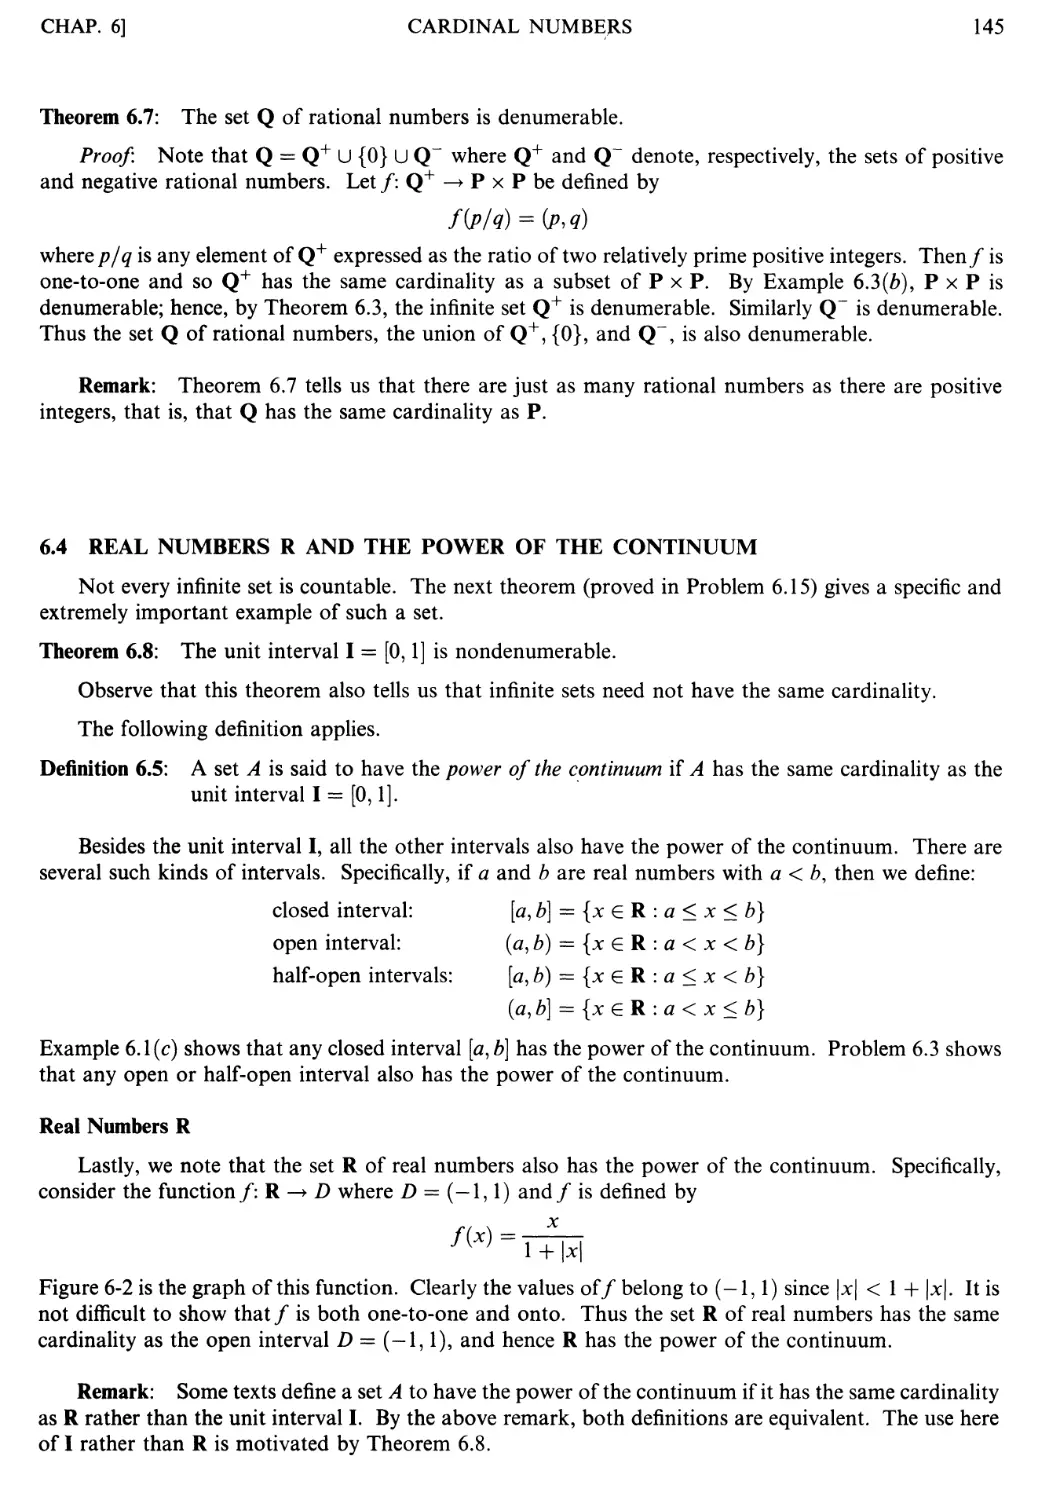 6.4 Real numbers $\mathbb{R}$ and the power of the continuum